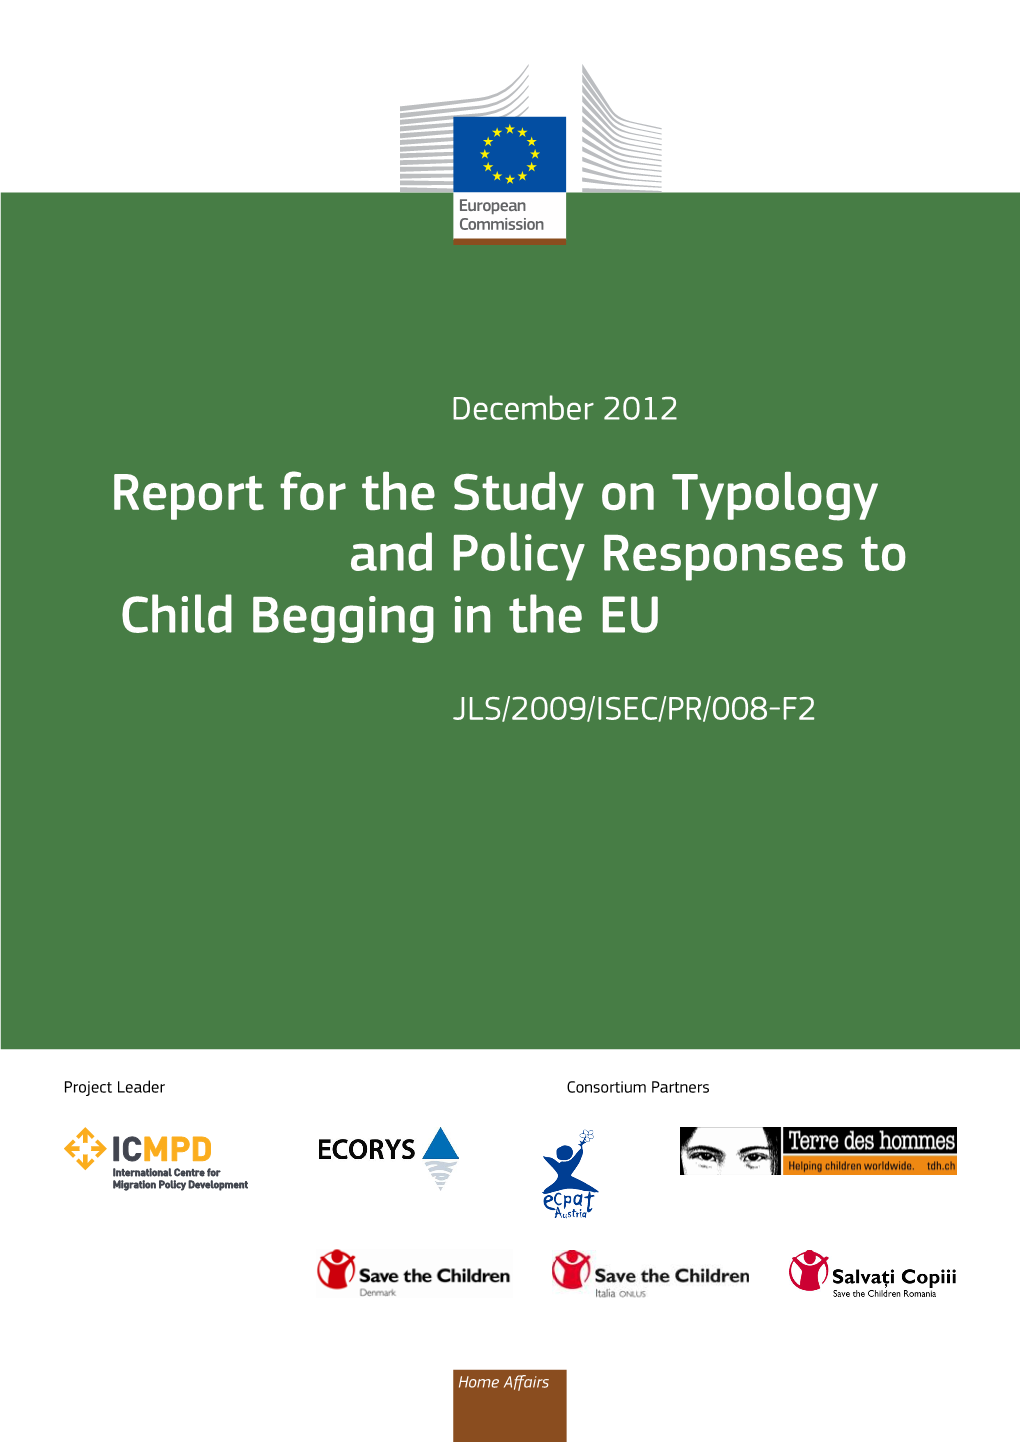 European Commission, Report for the Study on Typology and Policy Responses to Child Begging In